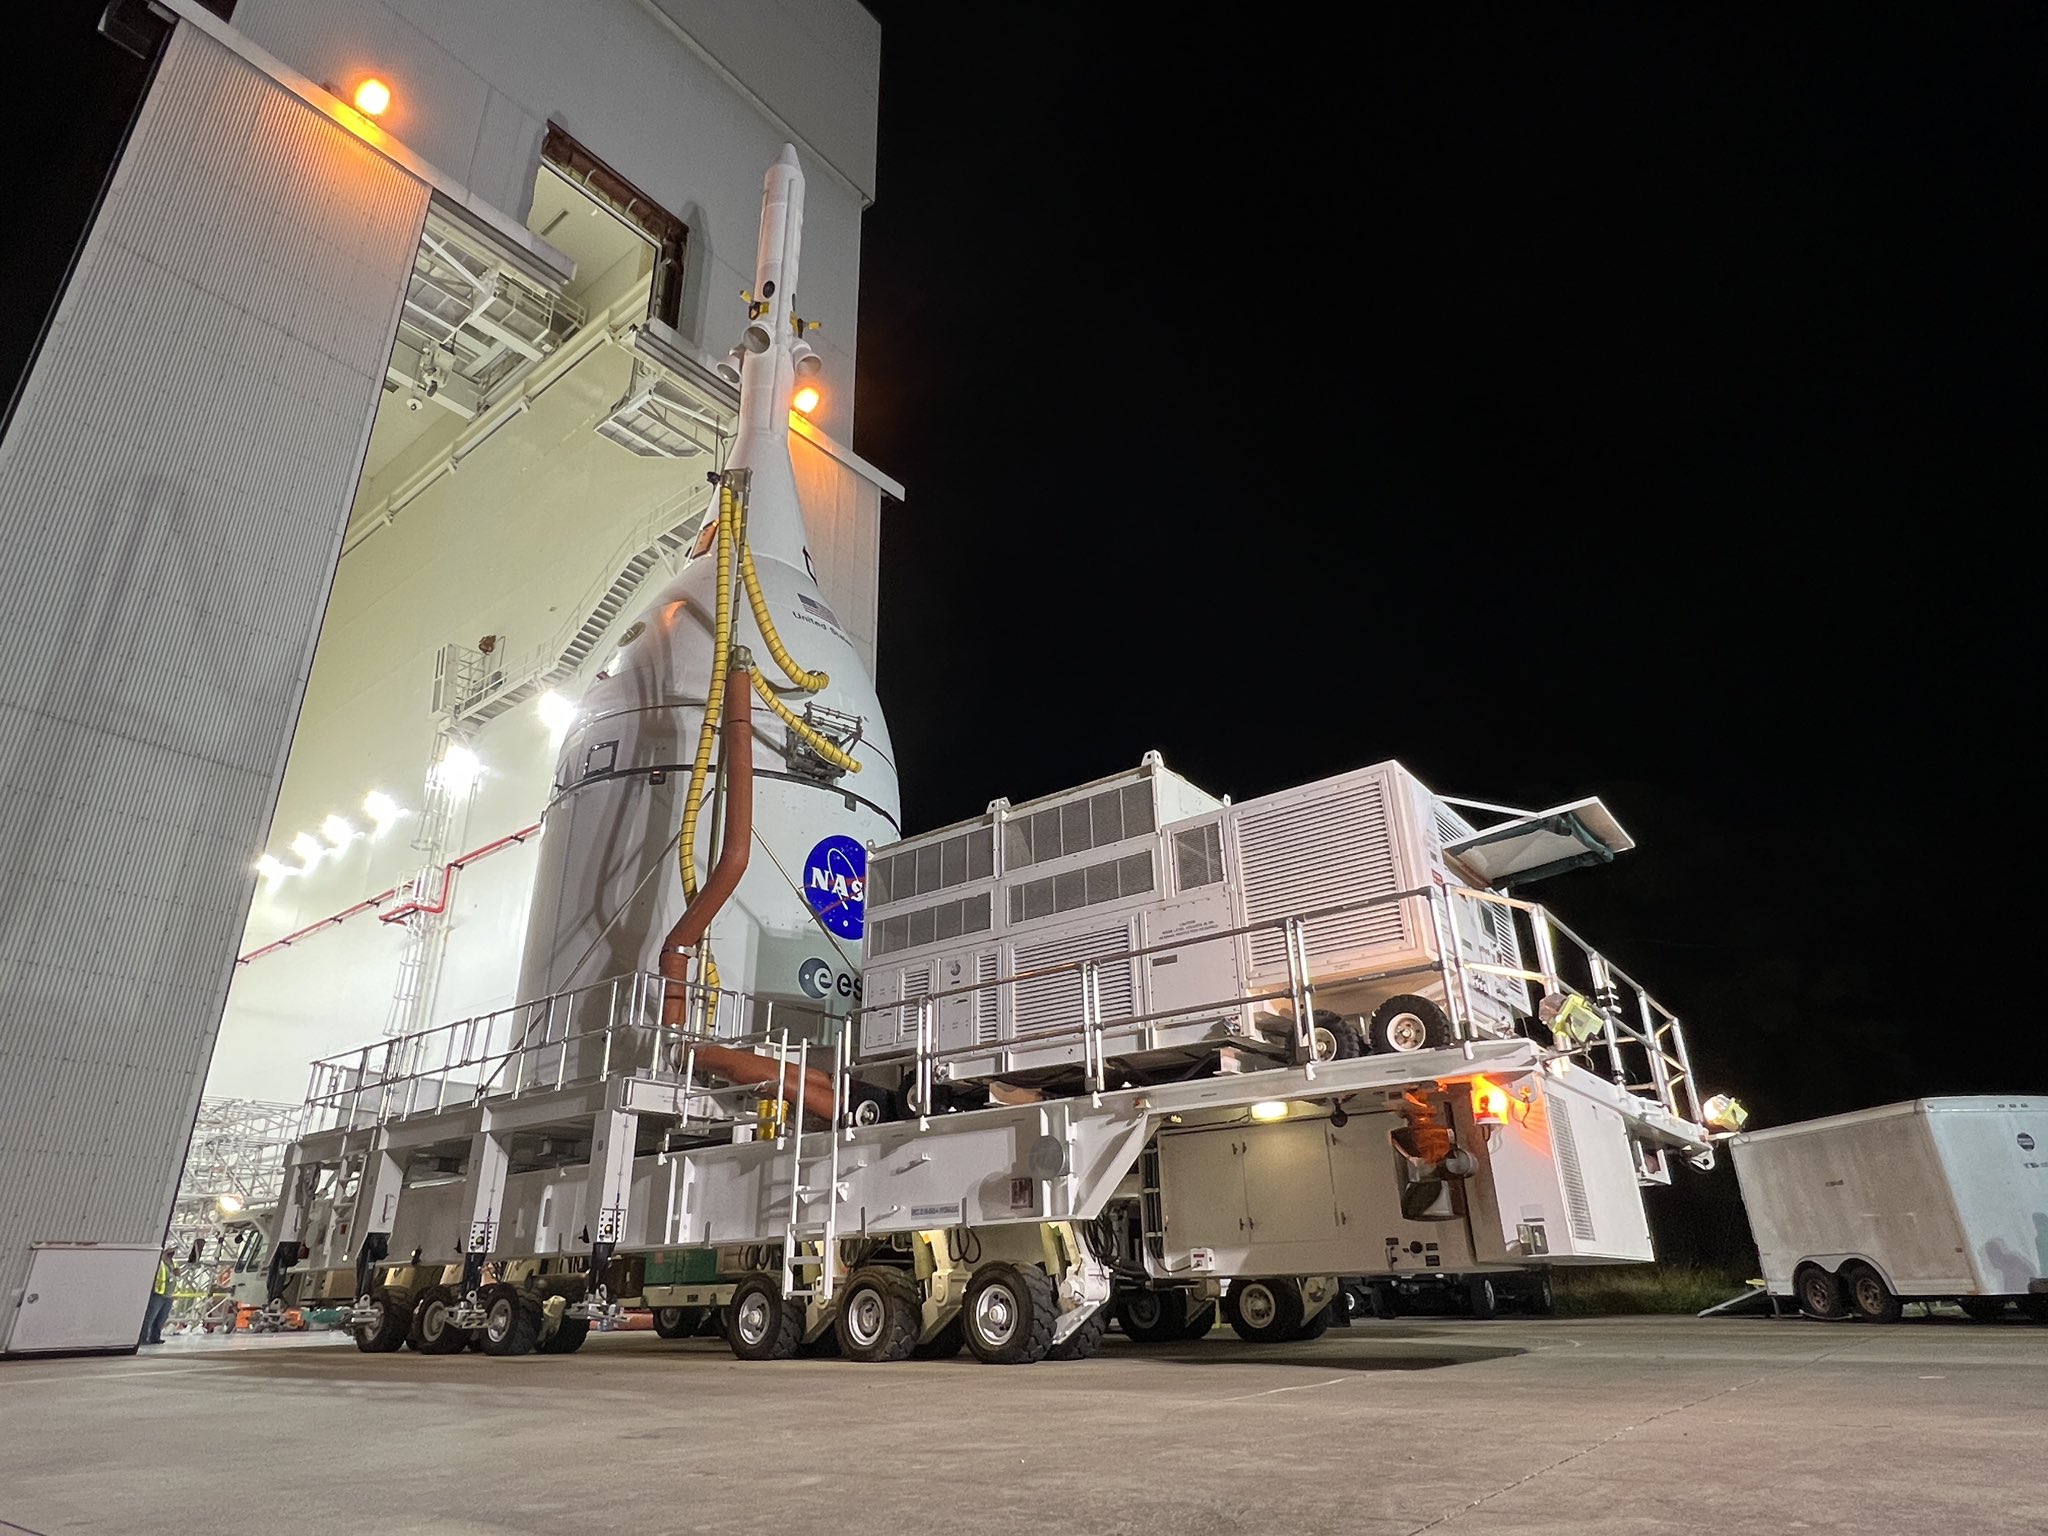 NASA Orion Crew Capsule Moved to VAB for Stacking on SLS Artemis 1 Moon Rocket at KSC: Photos